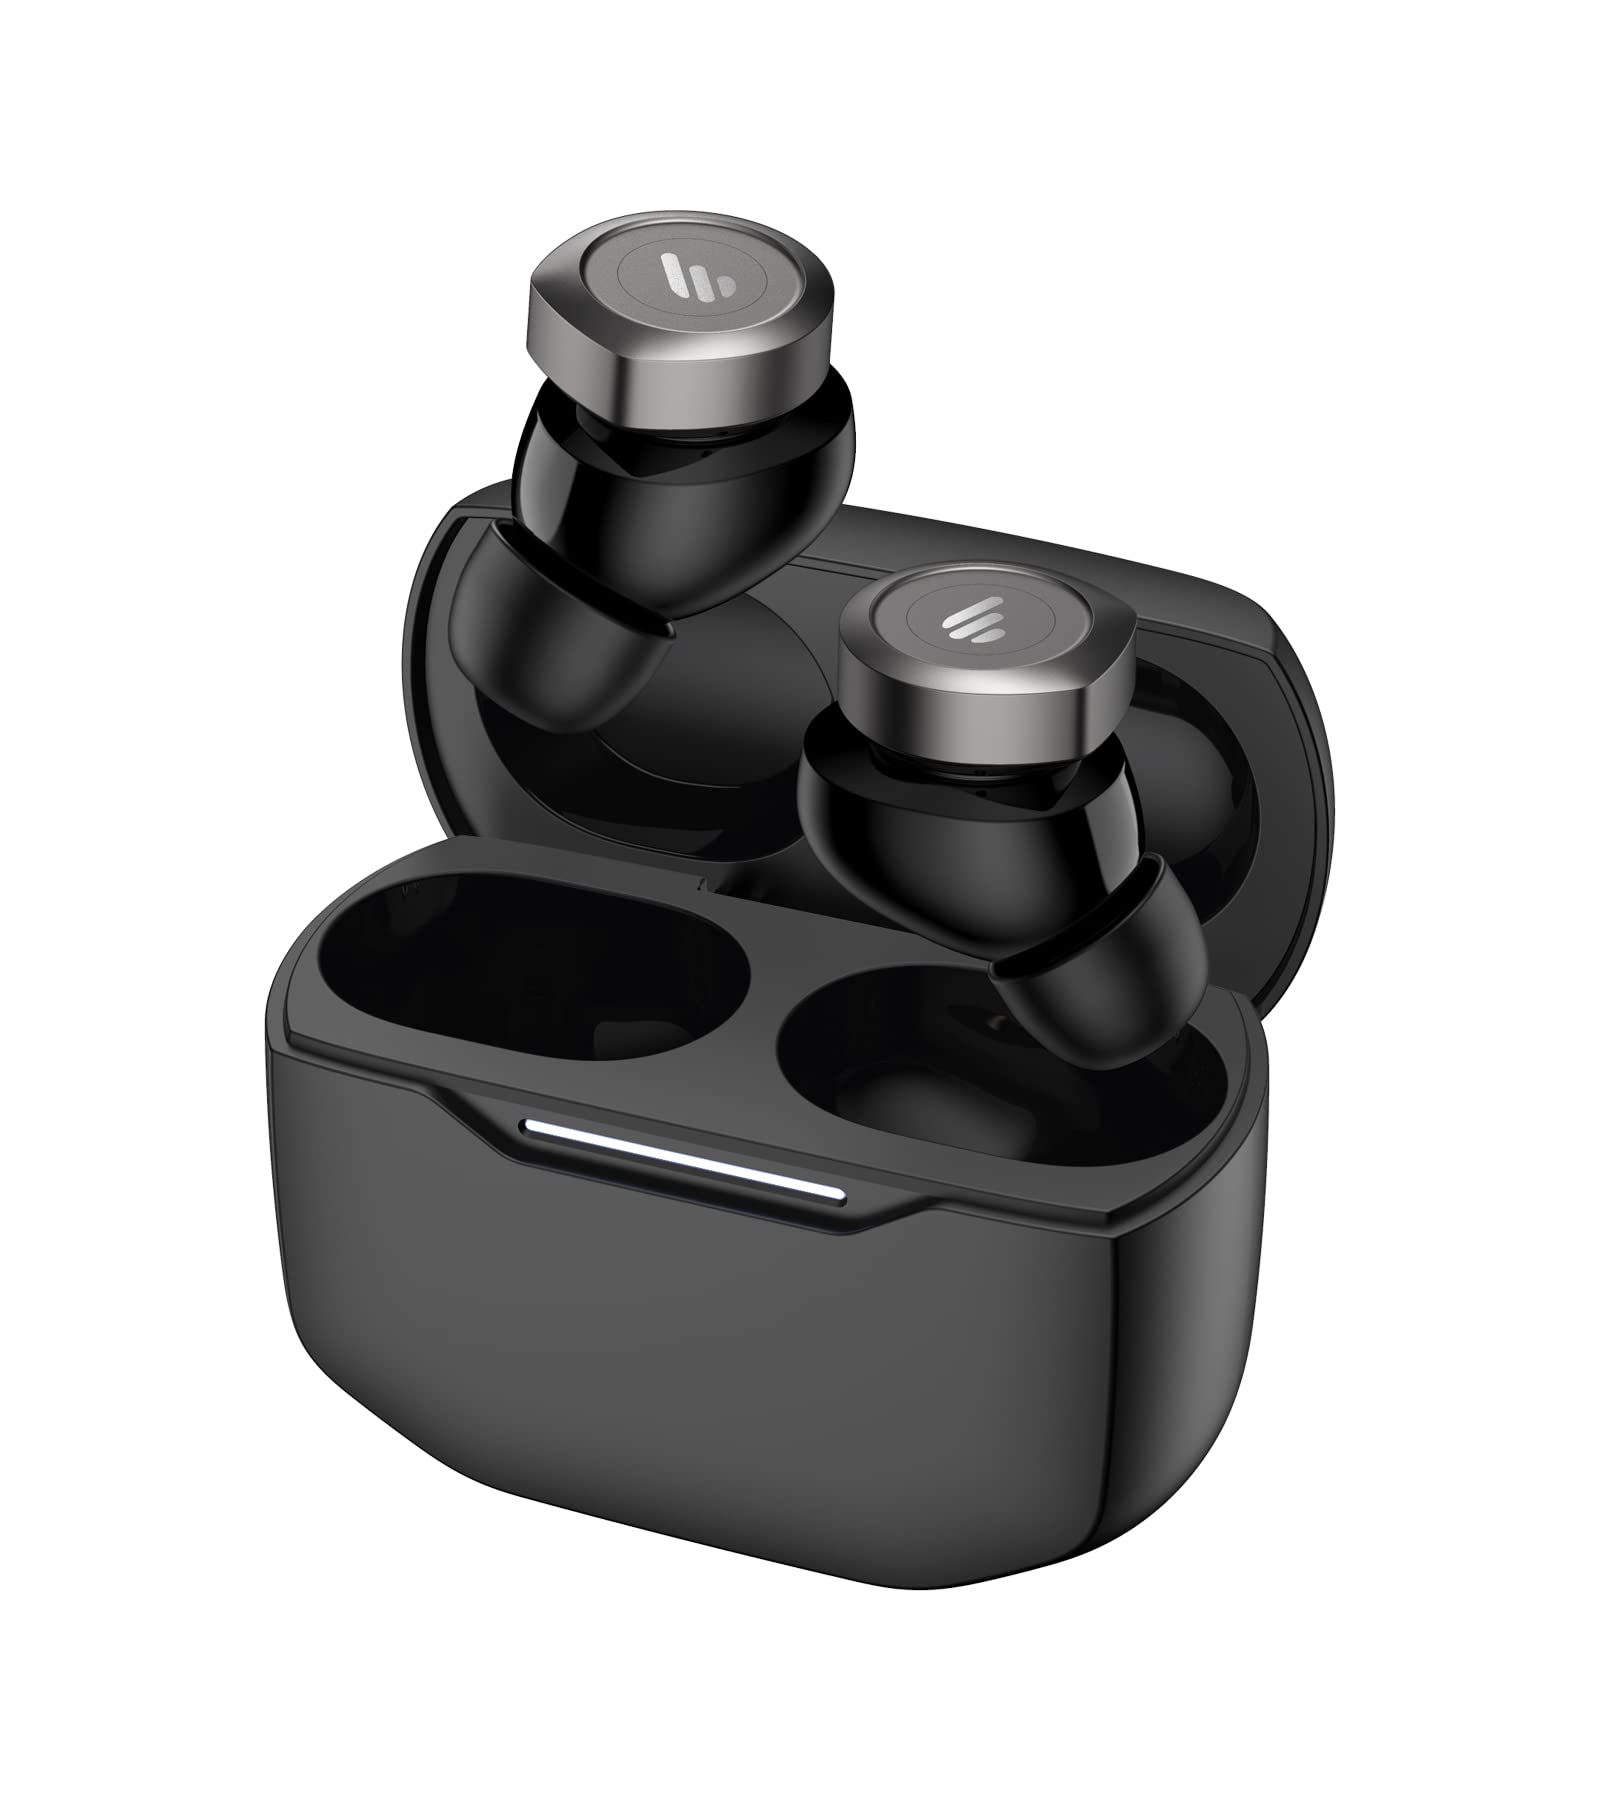 Edifier W240TN ANC Dual Driver Bluetooth Earbuds (Black, White or Blue) $35 + Free Shipping w/ Prime or on $35+